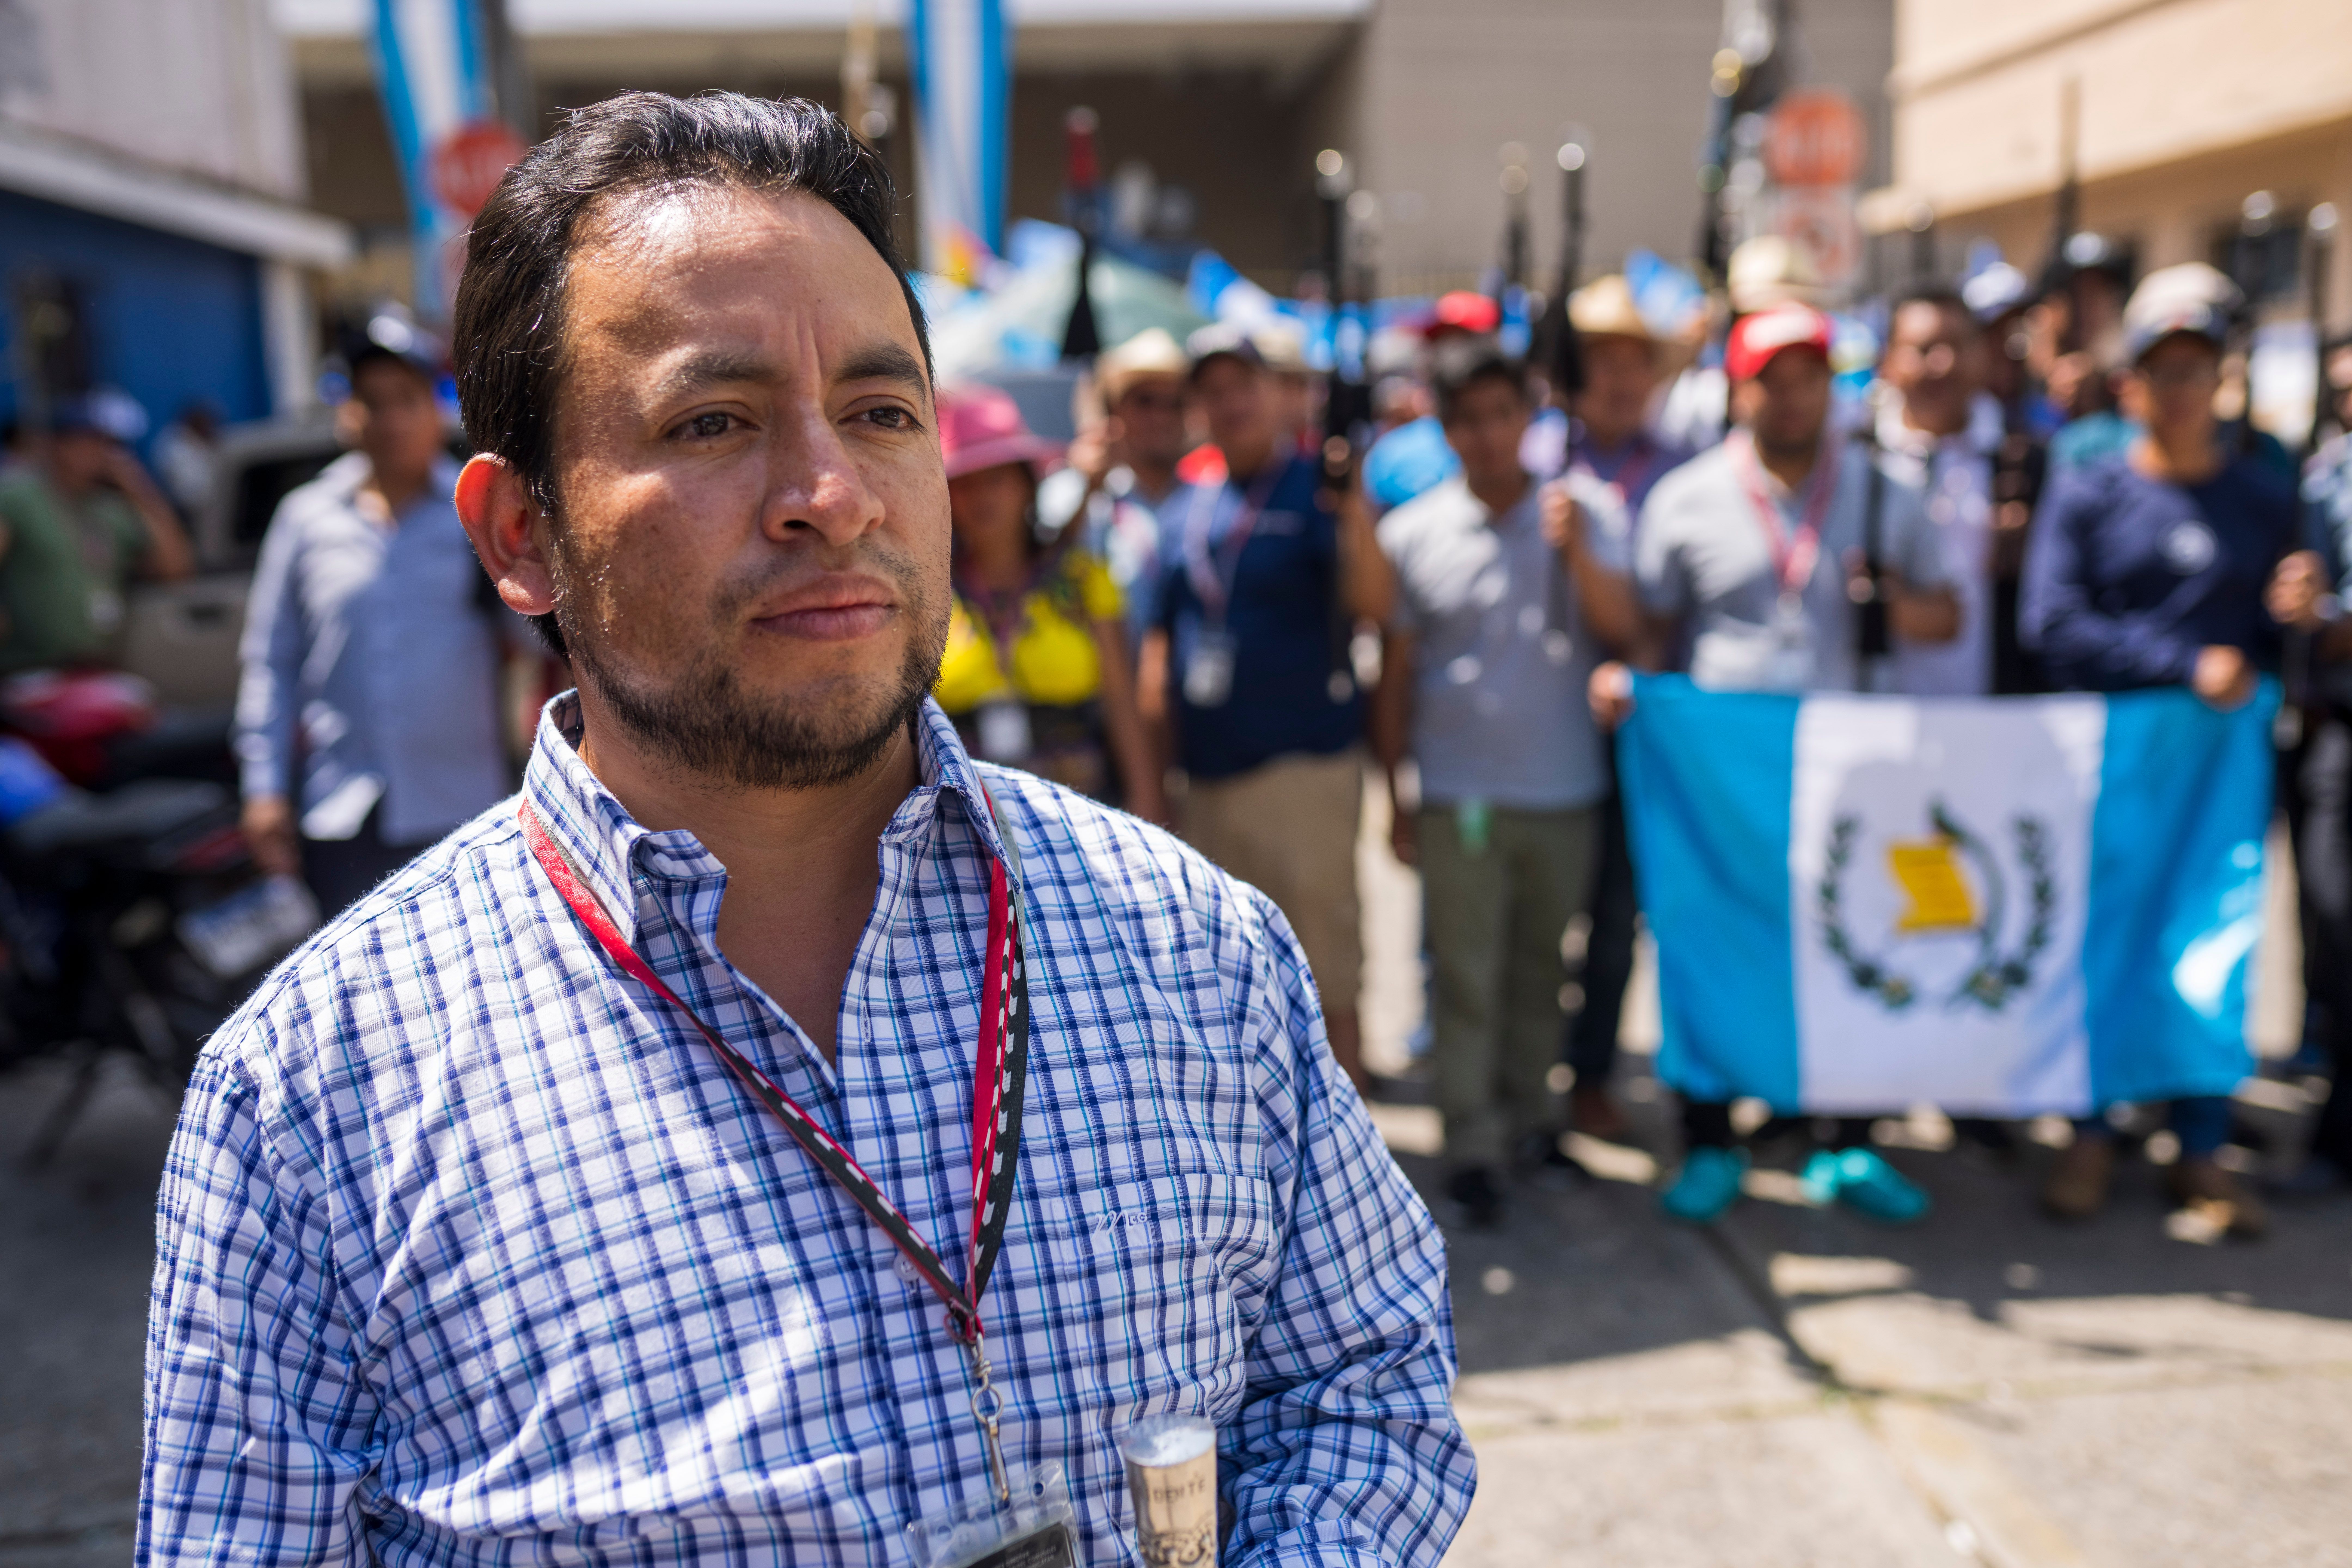 Indigenous leader of Guatemalan protests says they are defending